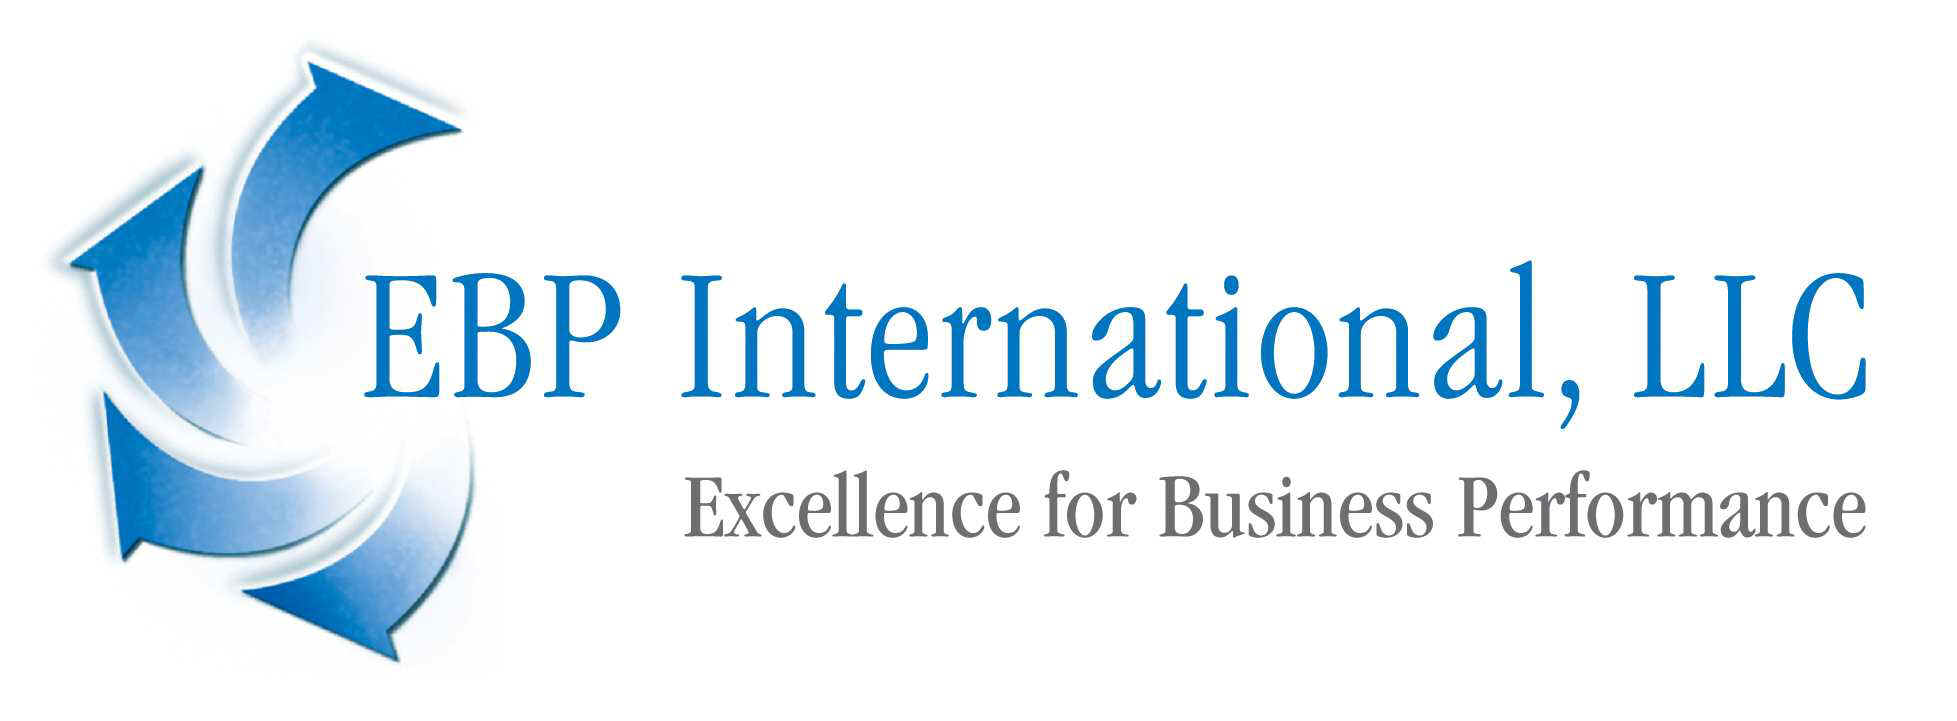 Excellence for Business Performance